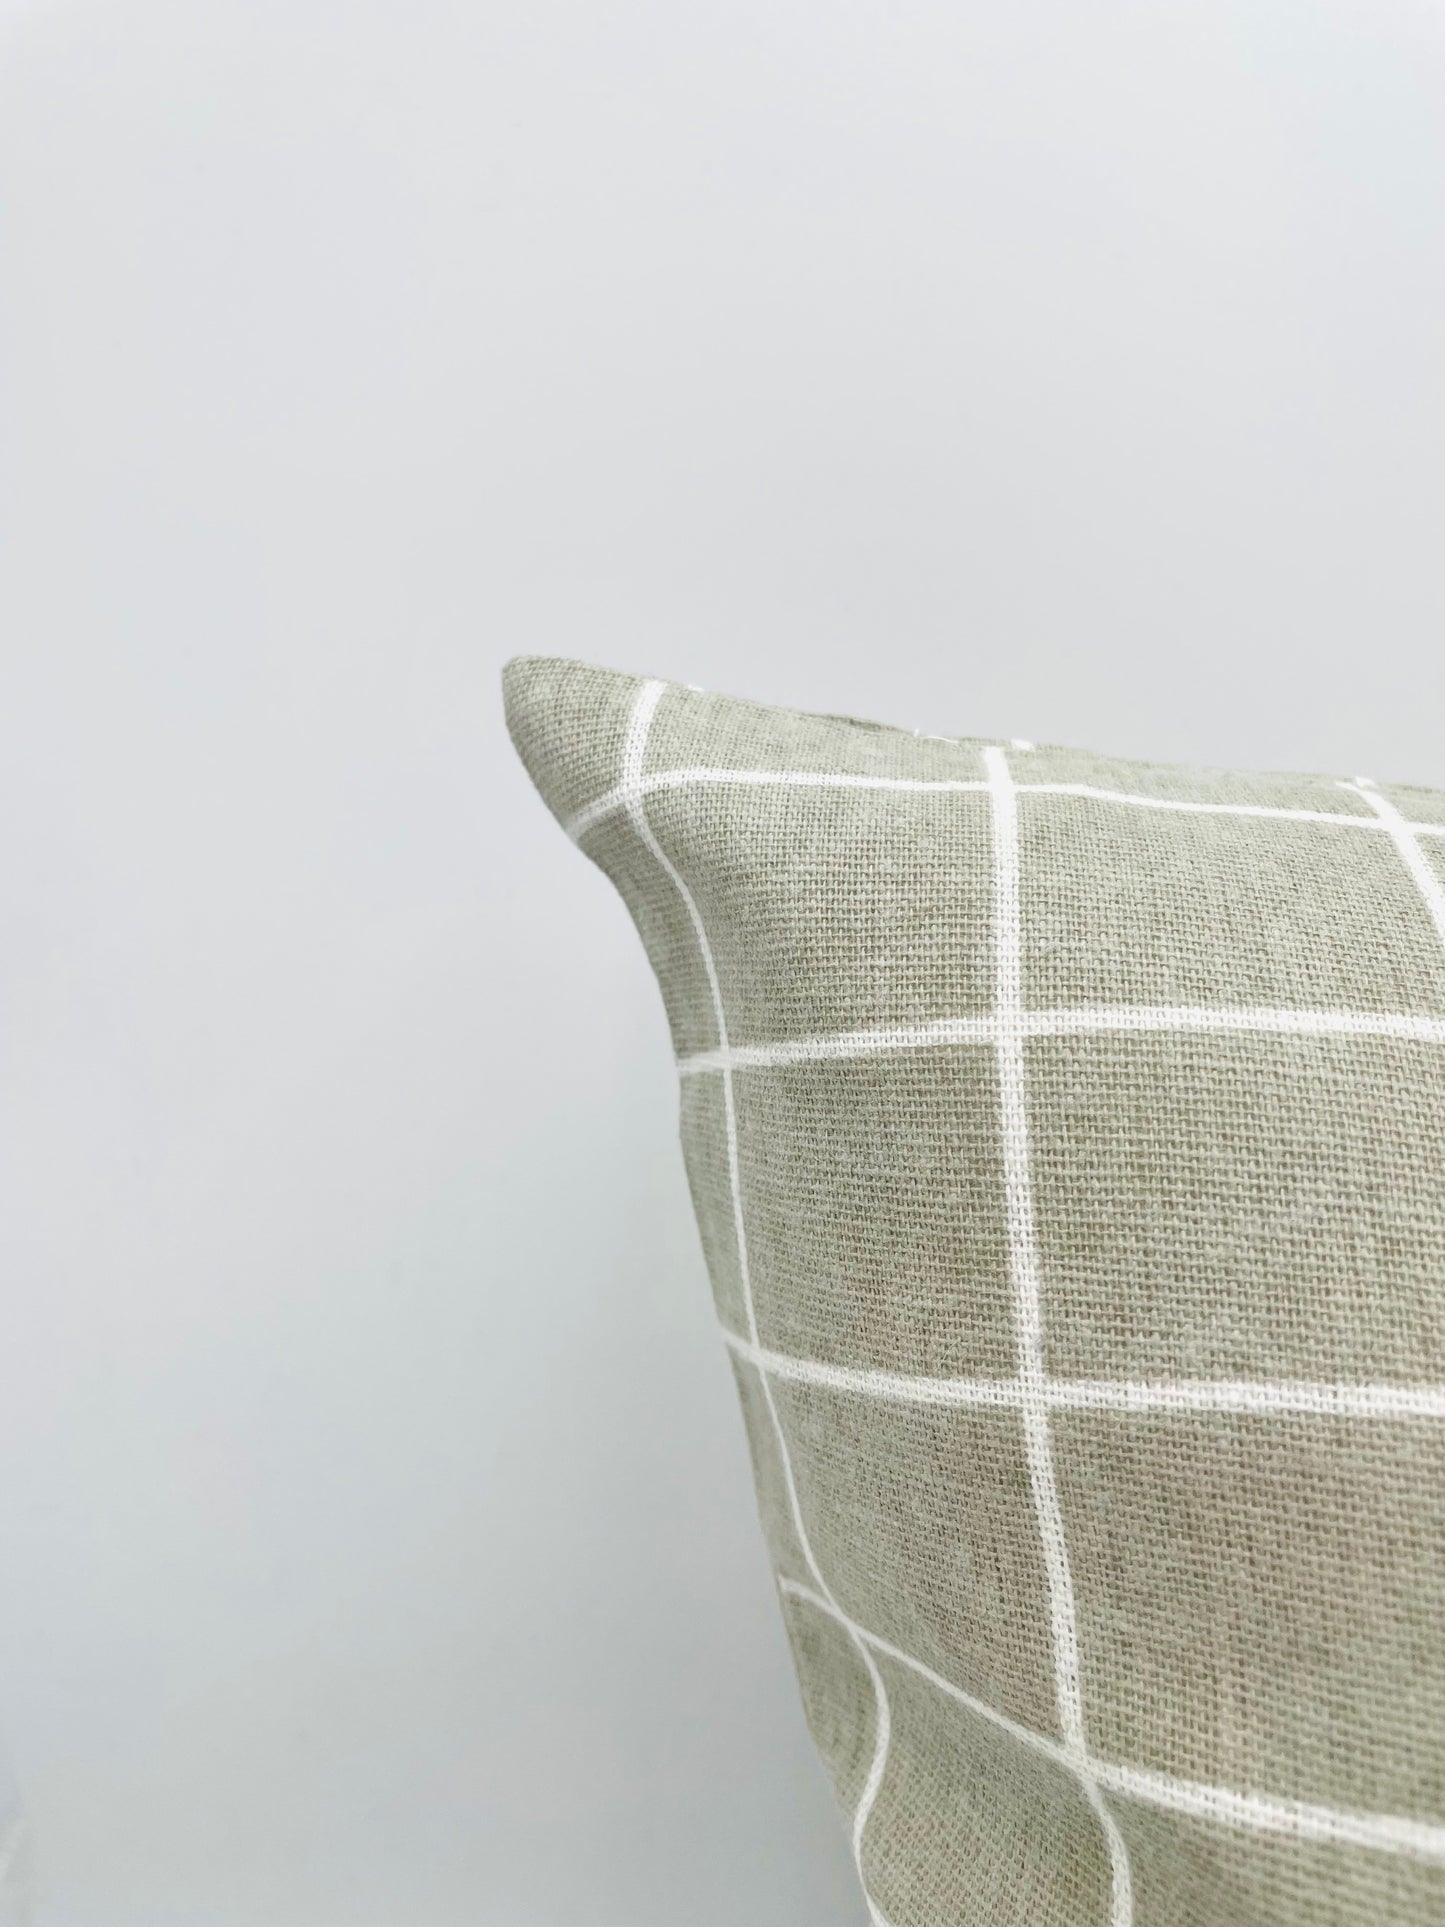 Green and White Checkered Pillow Cover (Set of 2)